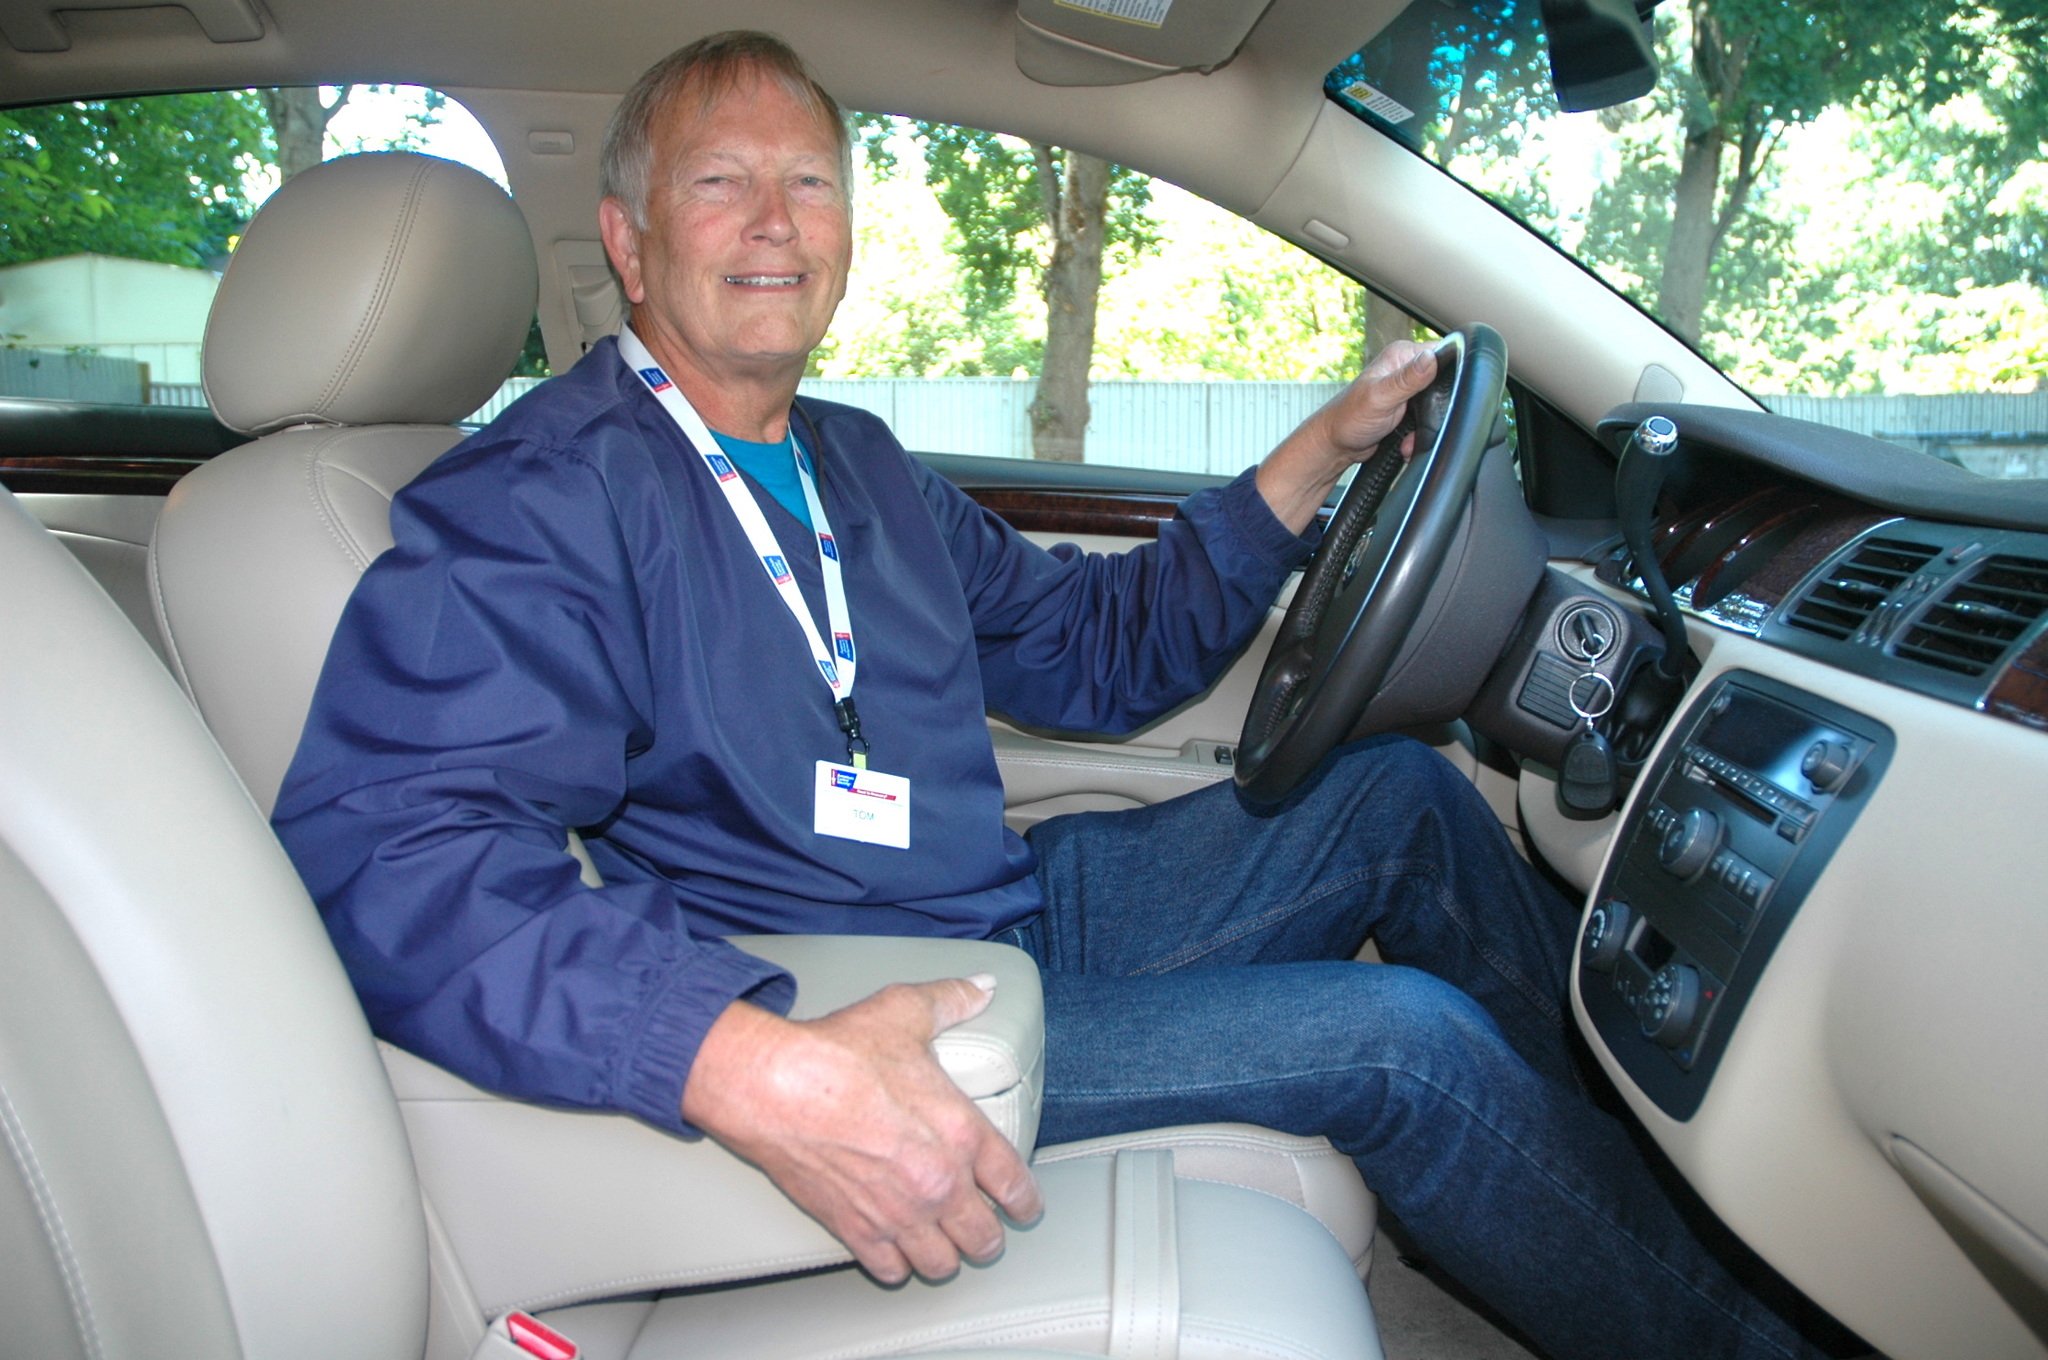 Kirk Boxleitner/Staff PhotoTom King spares at least one day a week to drive cancer patients to and from much-needed medical appointments in north Snohomish County through the American Cancer Society’s ‘Road To Recovery’ program.